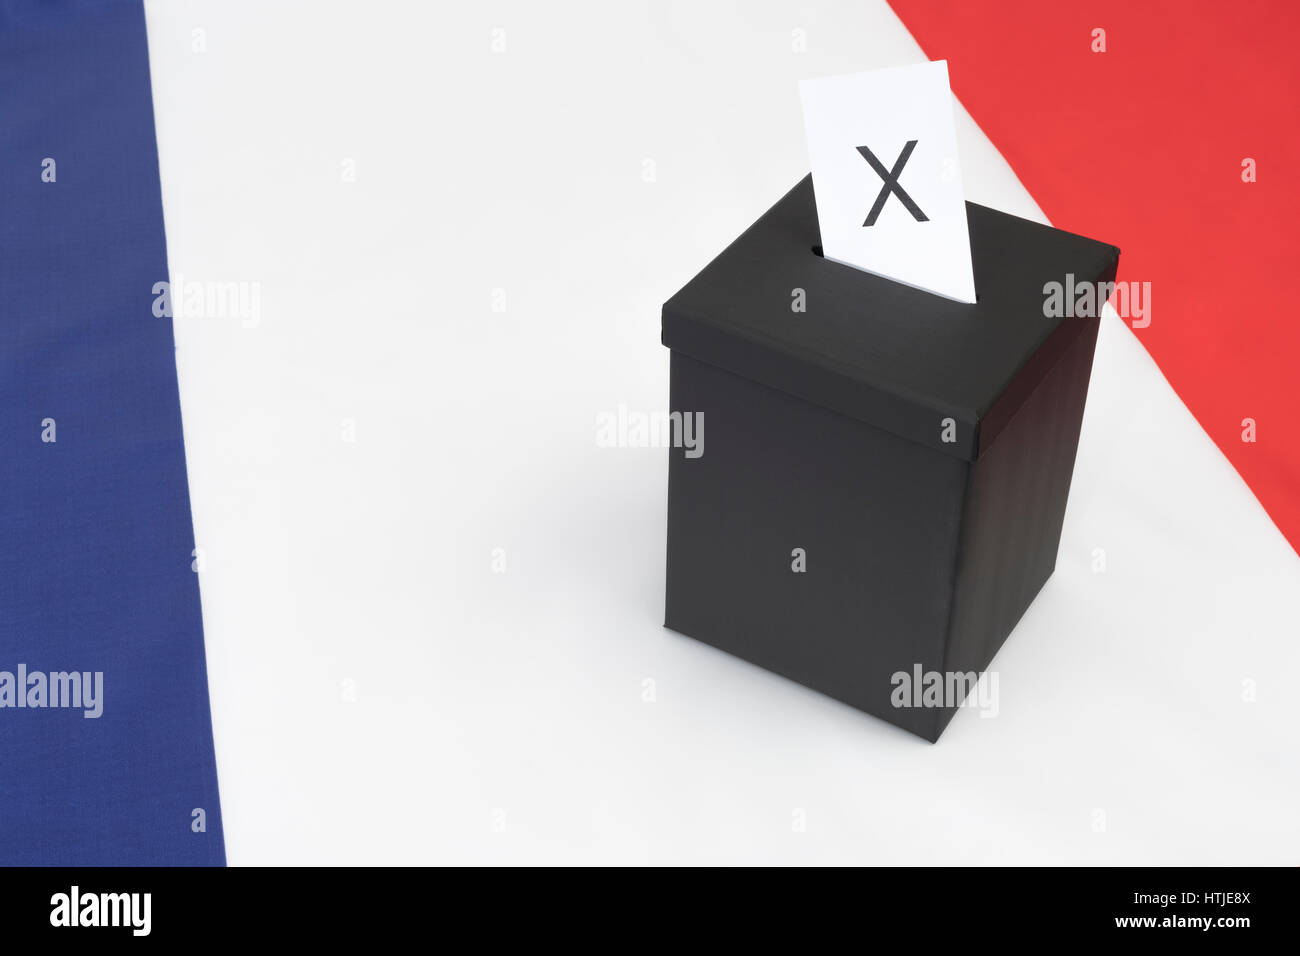 Small black box on French tricolor flag - as visual metaphor for the 2017 French General Election. Stock Photo